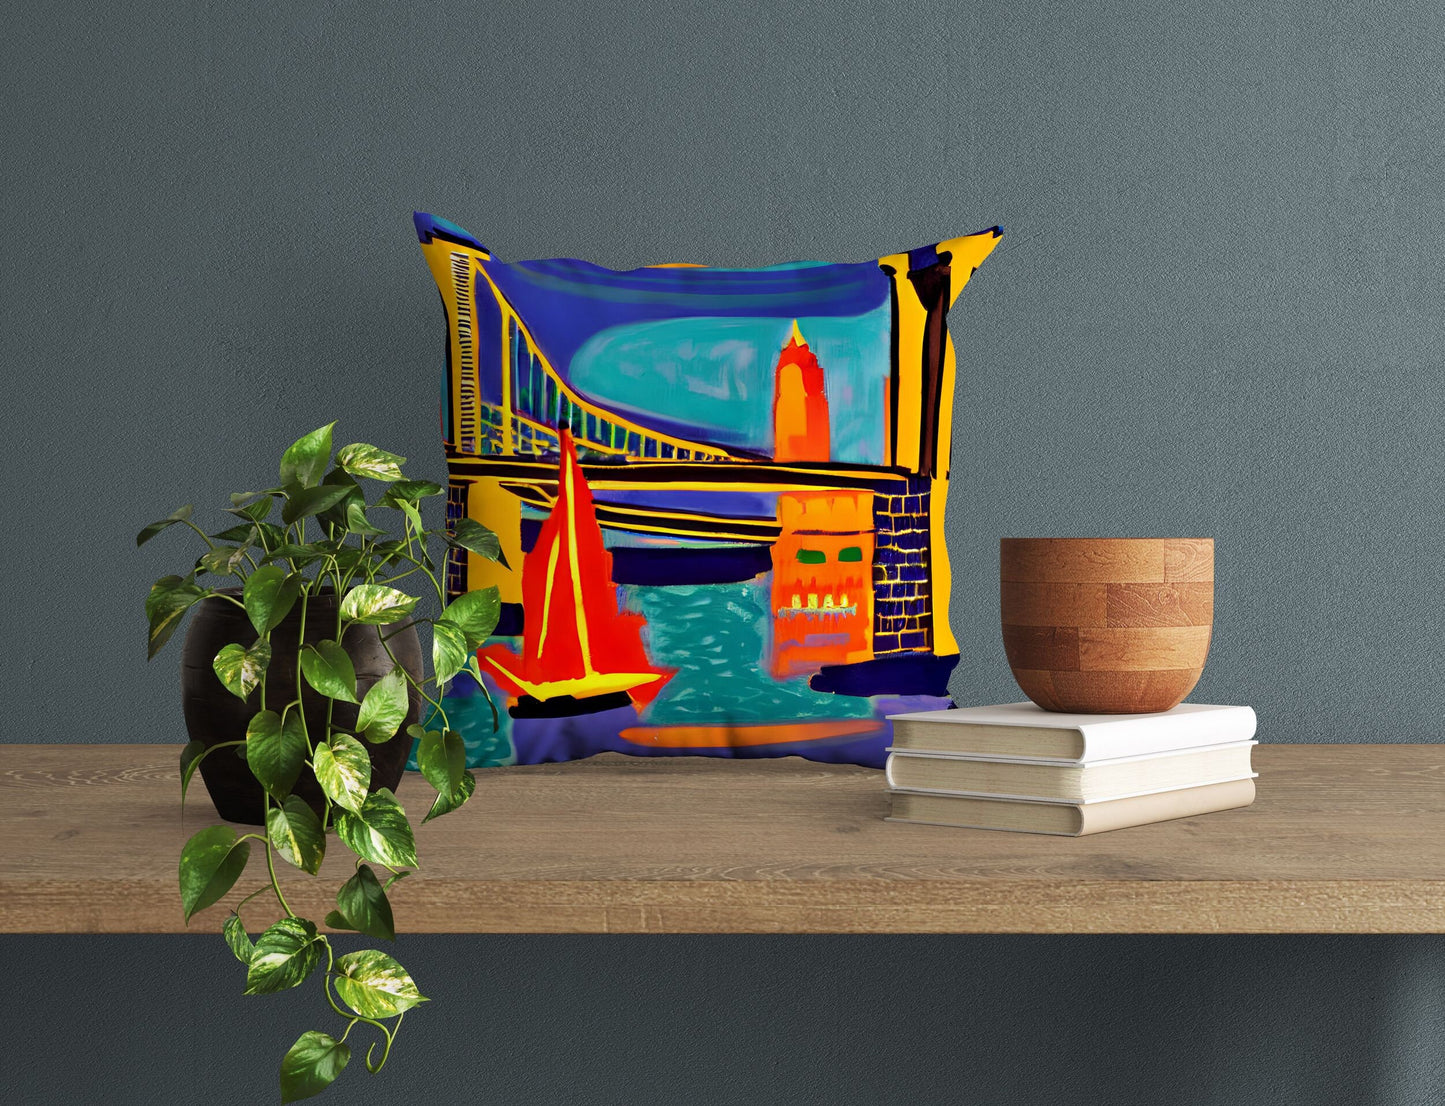 New York Brooklyn Bridge At Night, Tapestry Pillows, Abstract Pillow, Designer Pillow, Colorful Pillow Case, Impressionist Pillow